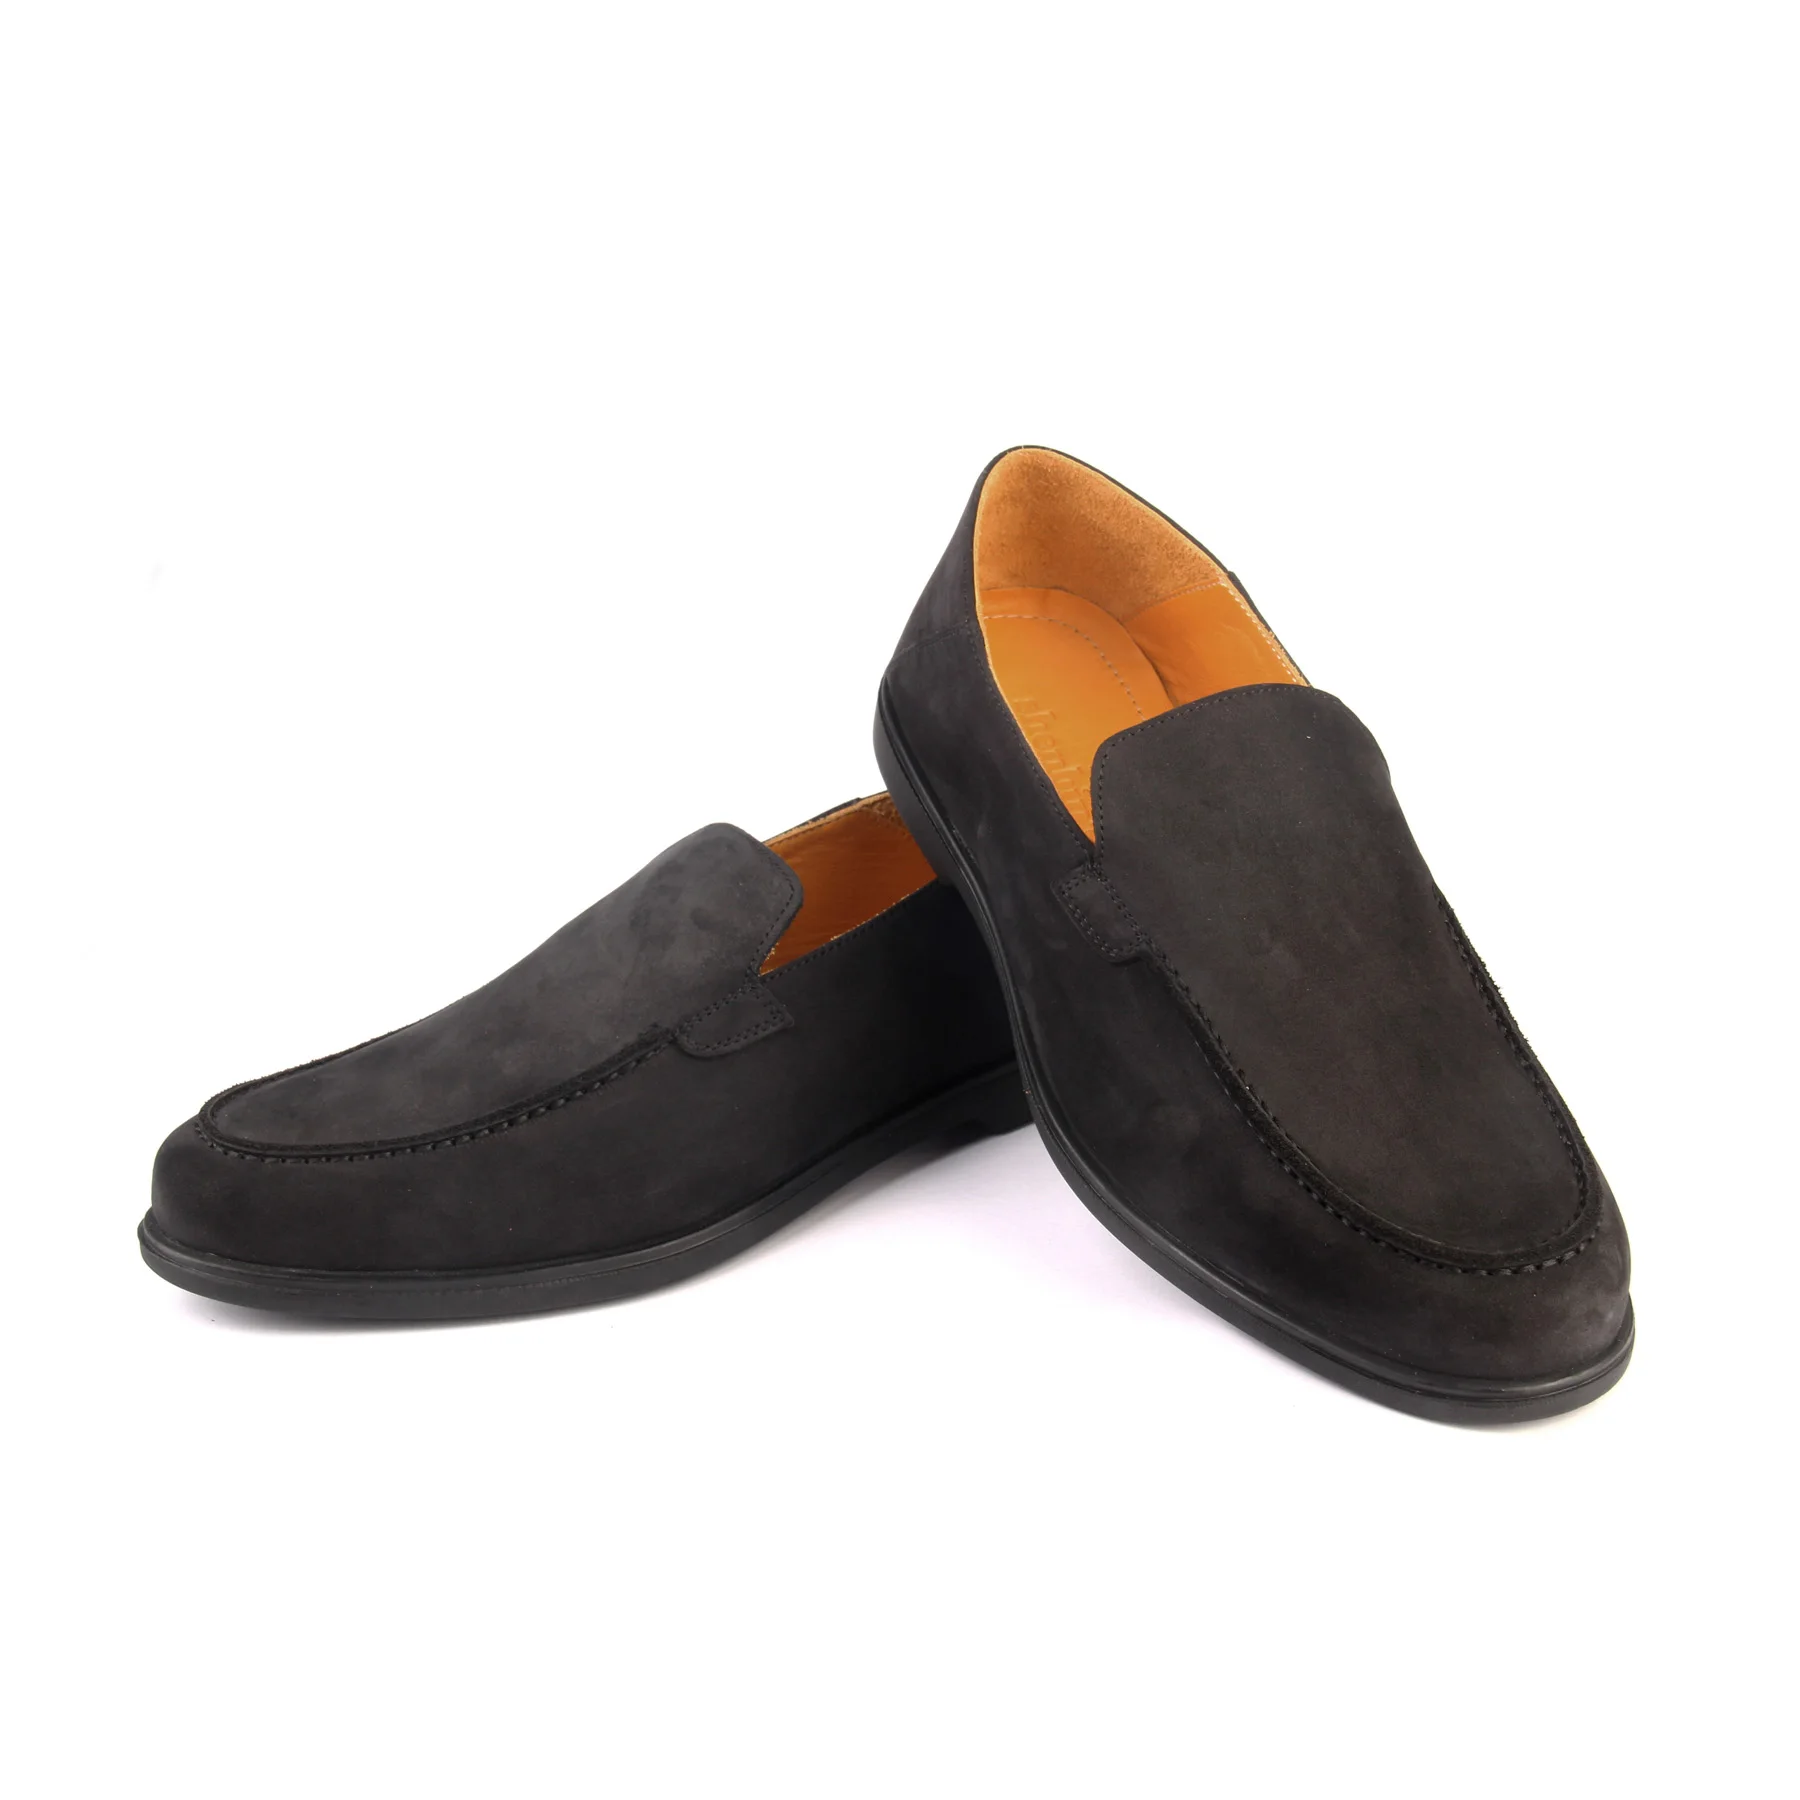 

Handmade Slip On Black Nubuk Loafers with Soft Rubber Sole, Full Leather Insole, Genuine Calfskin Leather, Men's Comfort Shoes